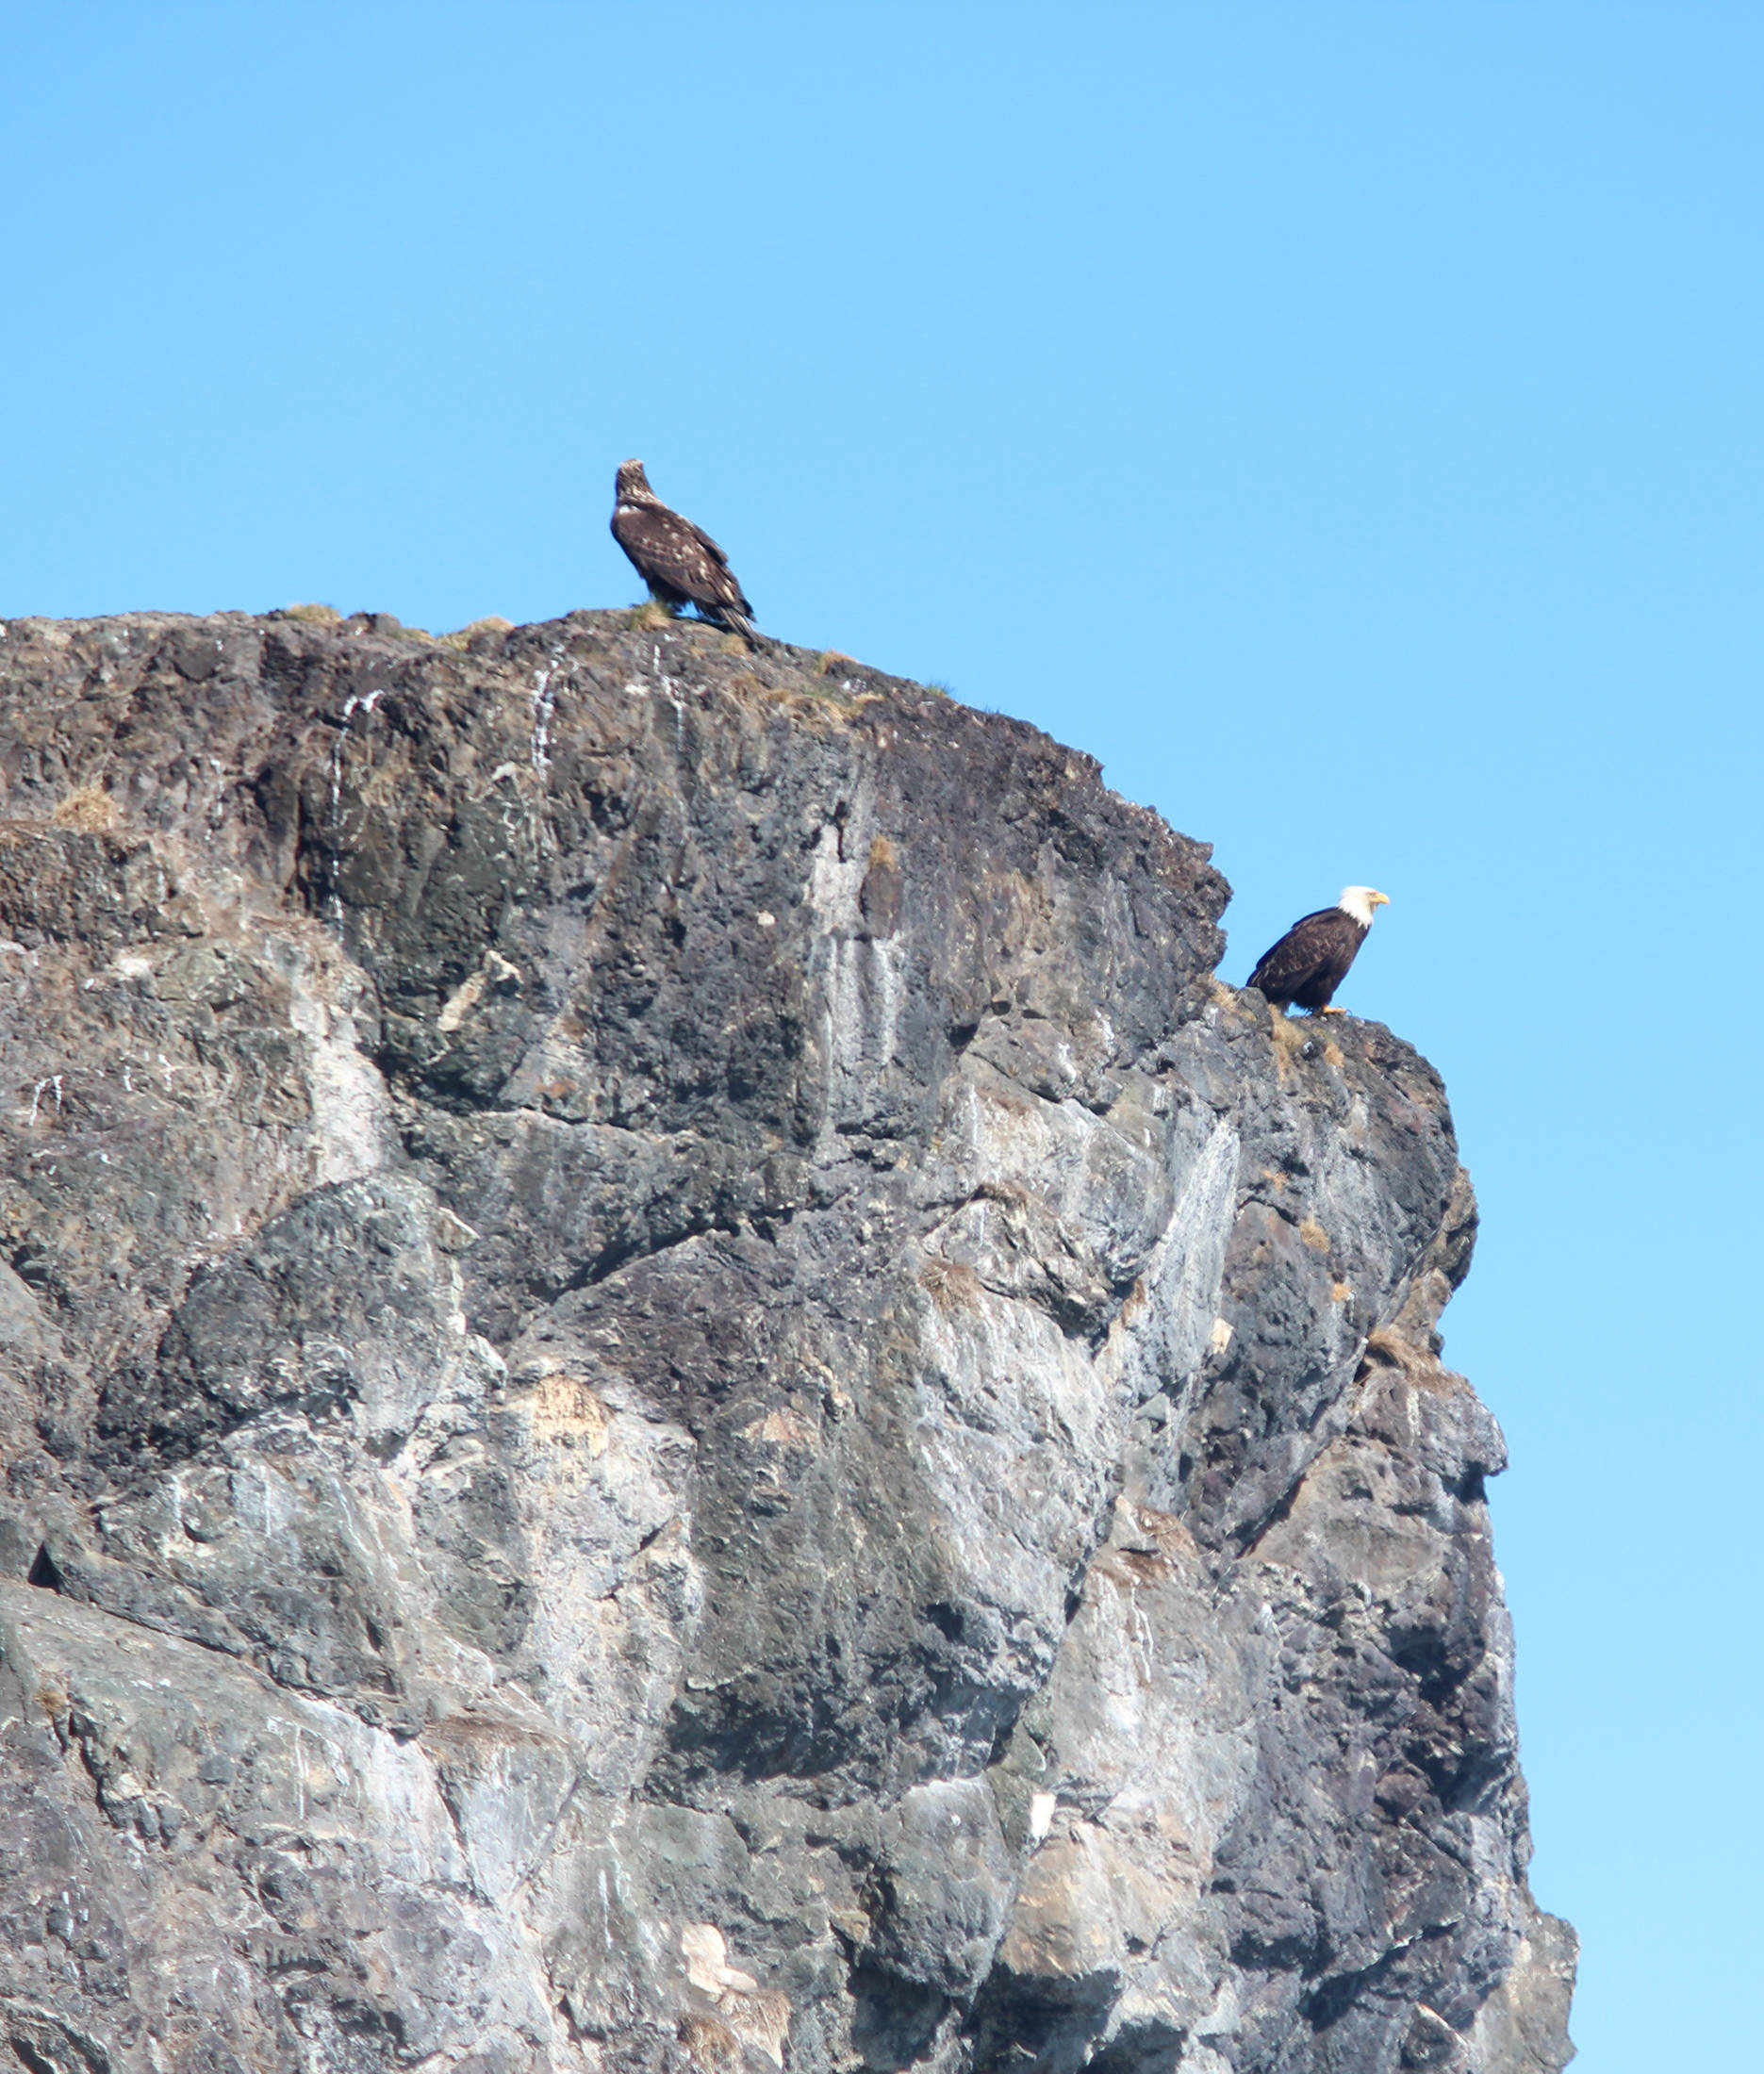 Two eagles survey the water from their perch on Gull Island in Kachemak Bay on Saturday, April 14, 2018 in Homer, Alaska. (Photo by Megan Pacer/Homer News)